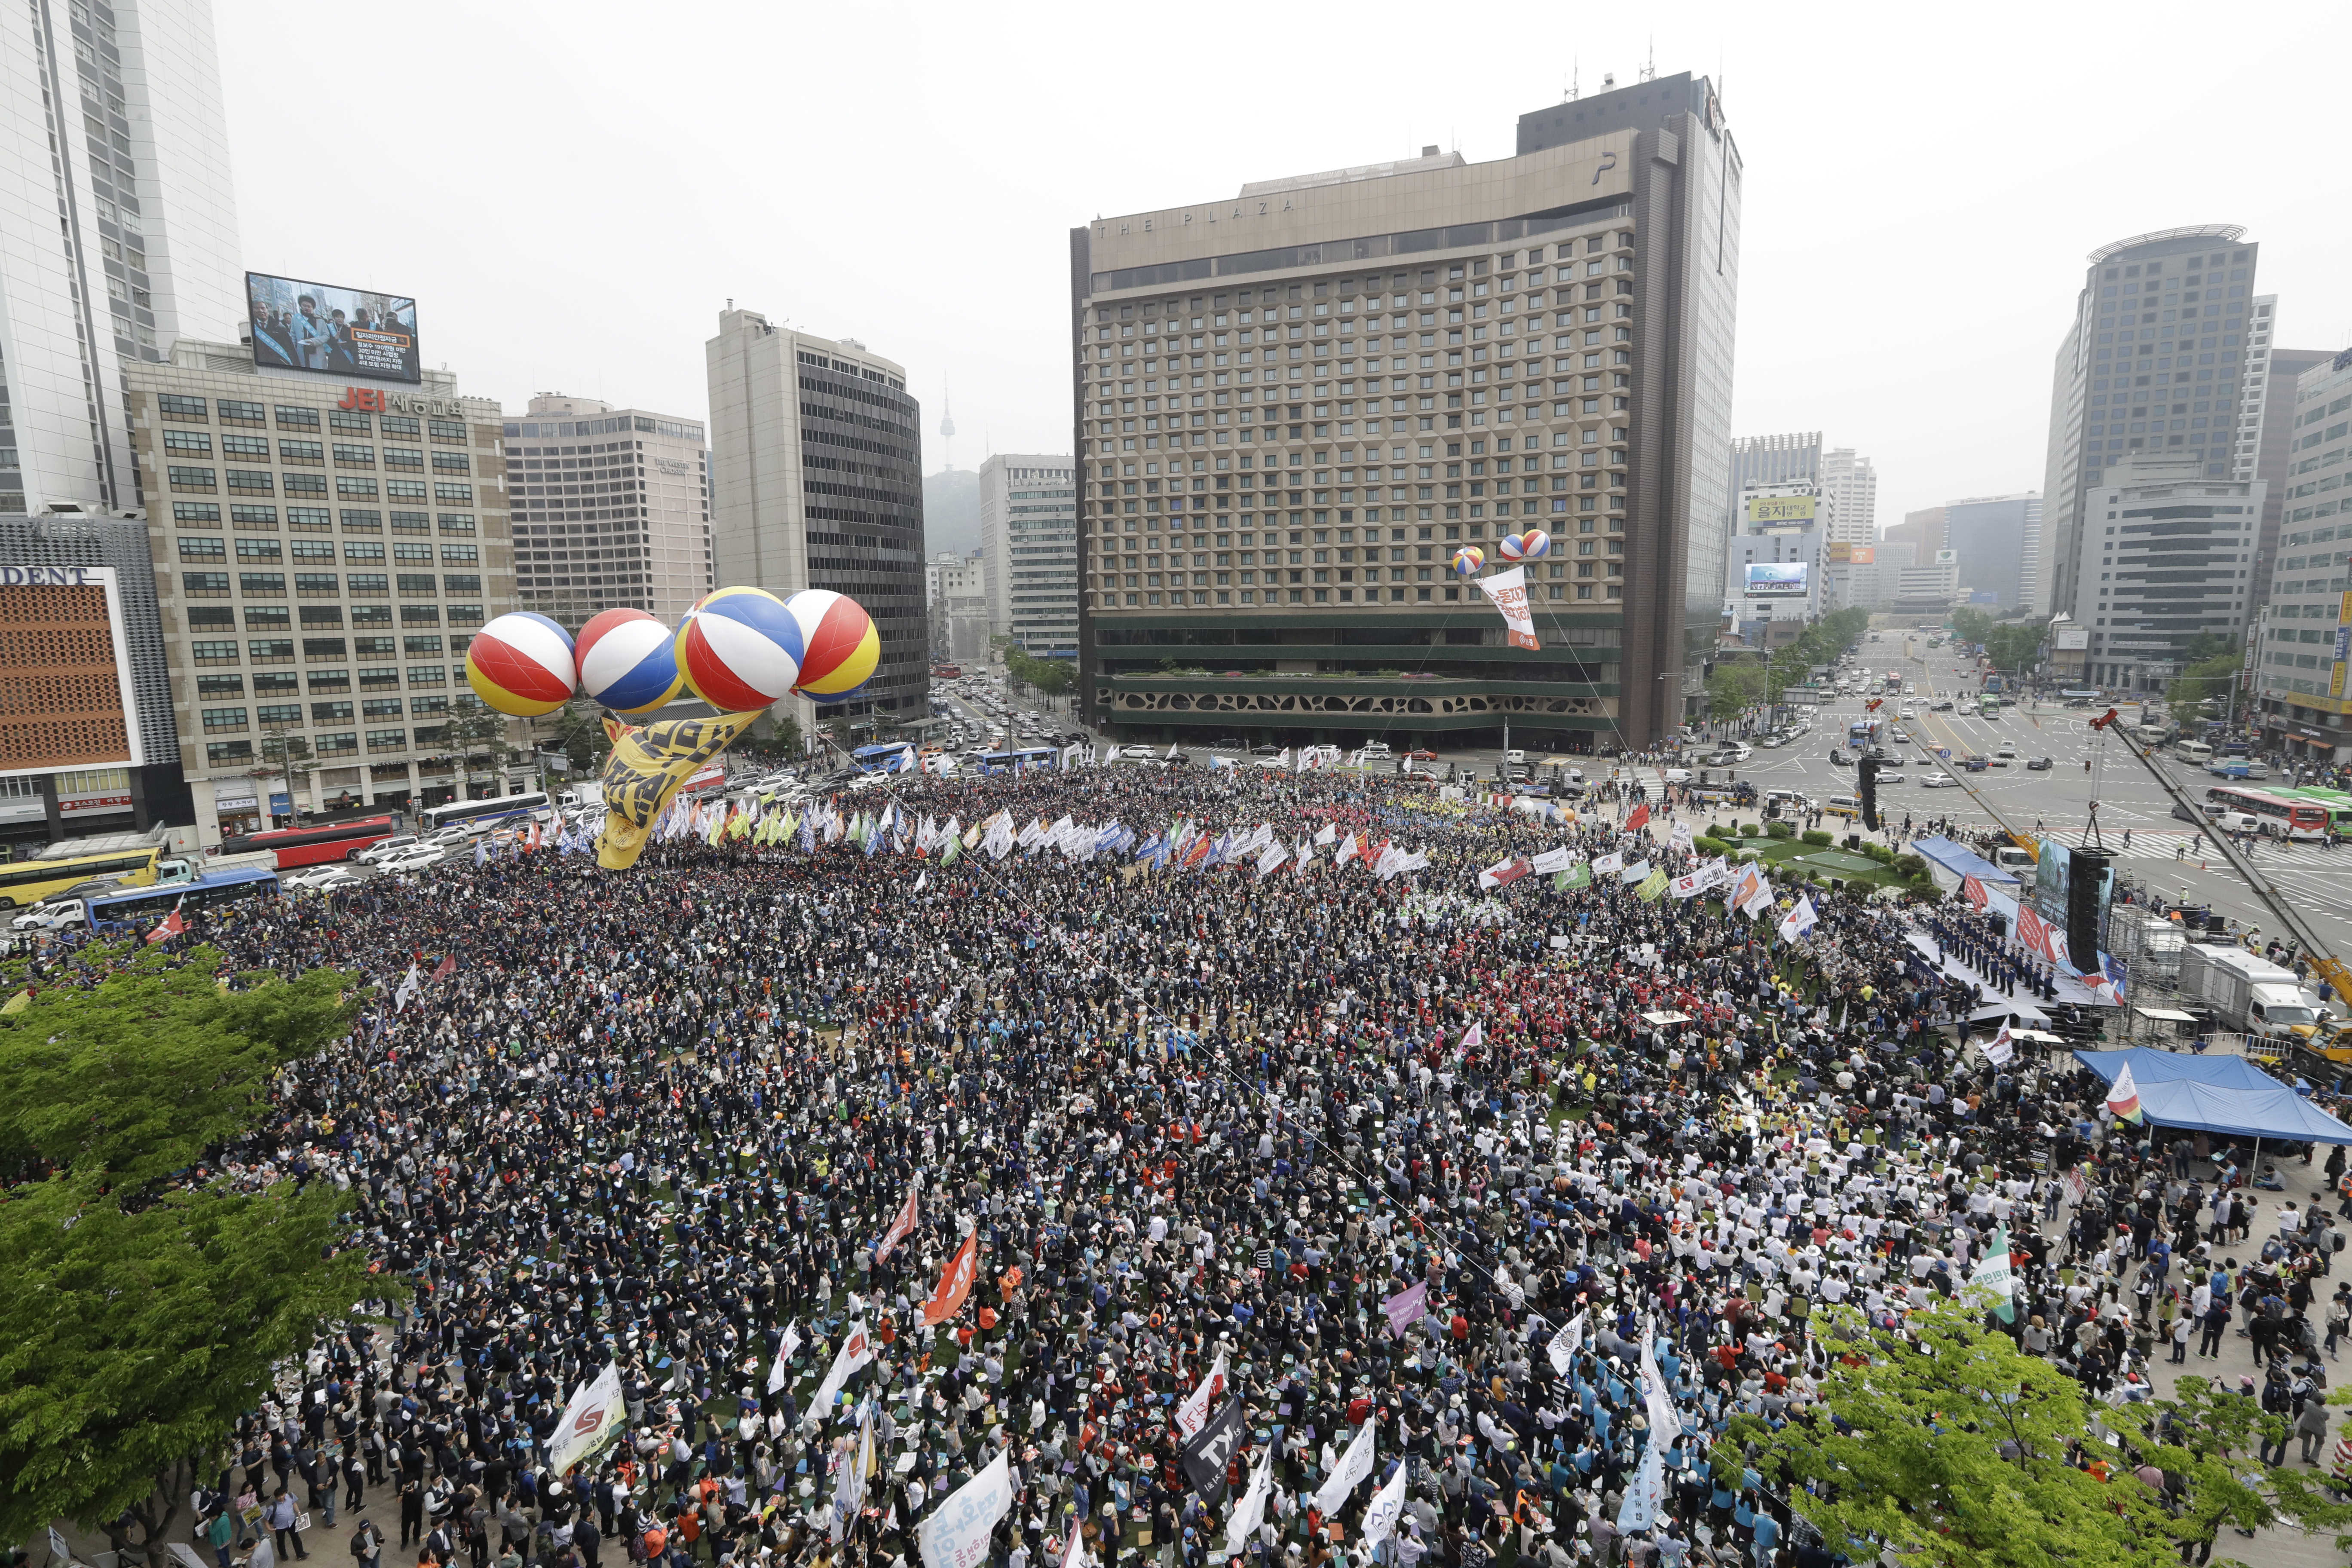 Members of the Korean Confederation of Trade Unions attend a May Day rally in Seoul Plaza (Lee Jin-man/AP)